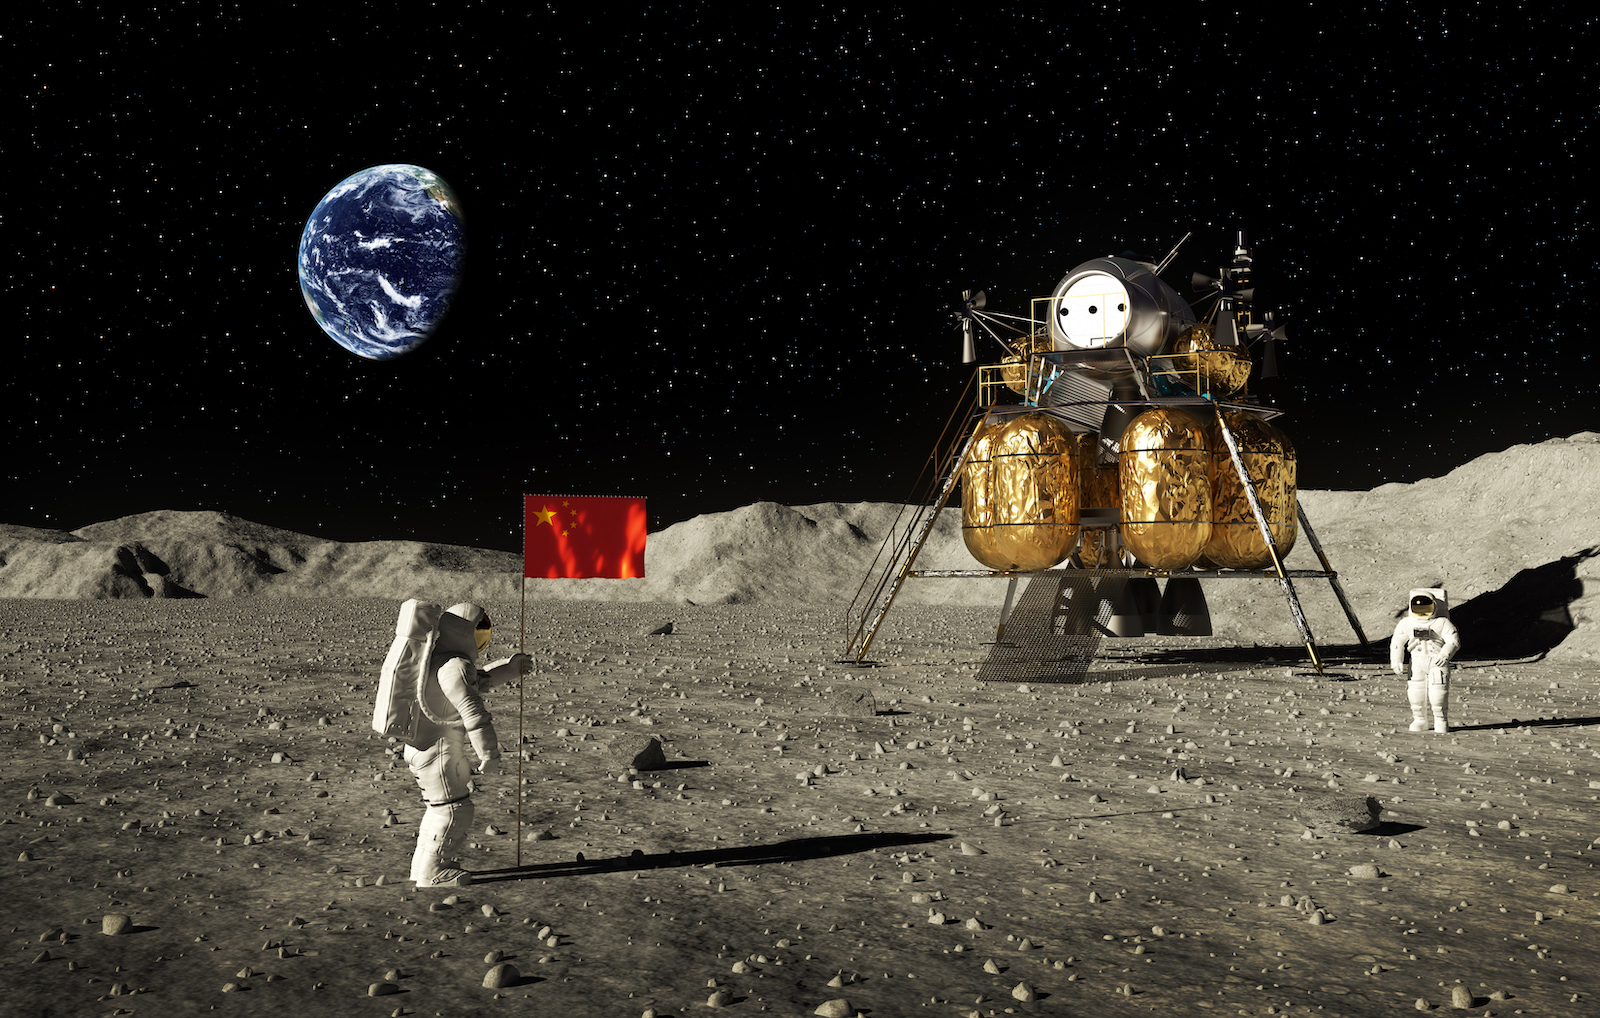 NASA's head warned that China may try to claim the moon — two space scholars explain why that's unlikely to happen